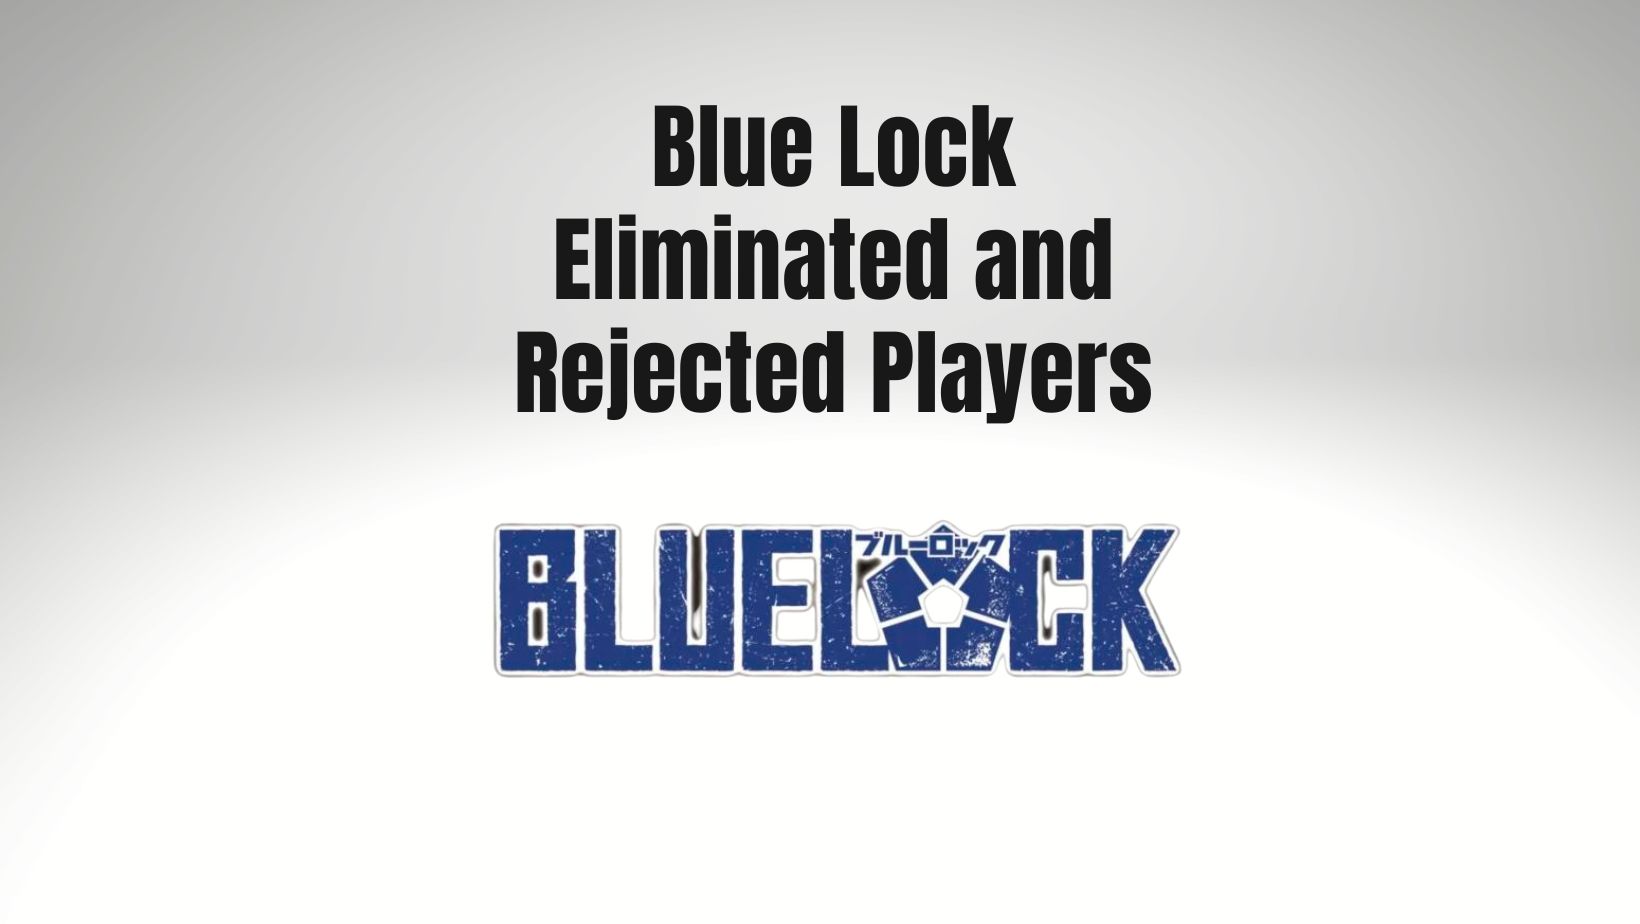 Blue Lock Eliminated and Rejected Players